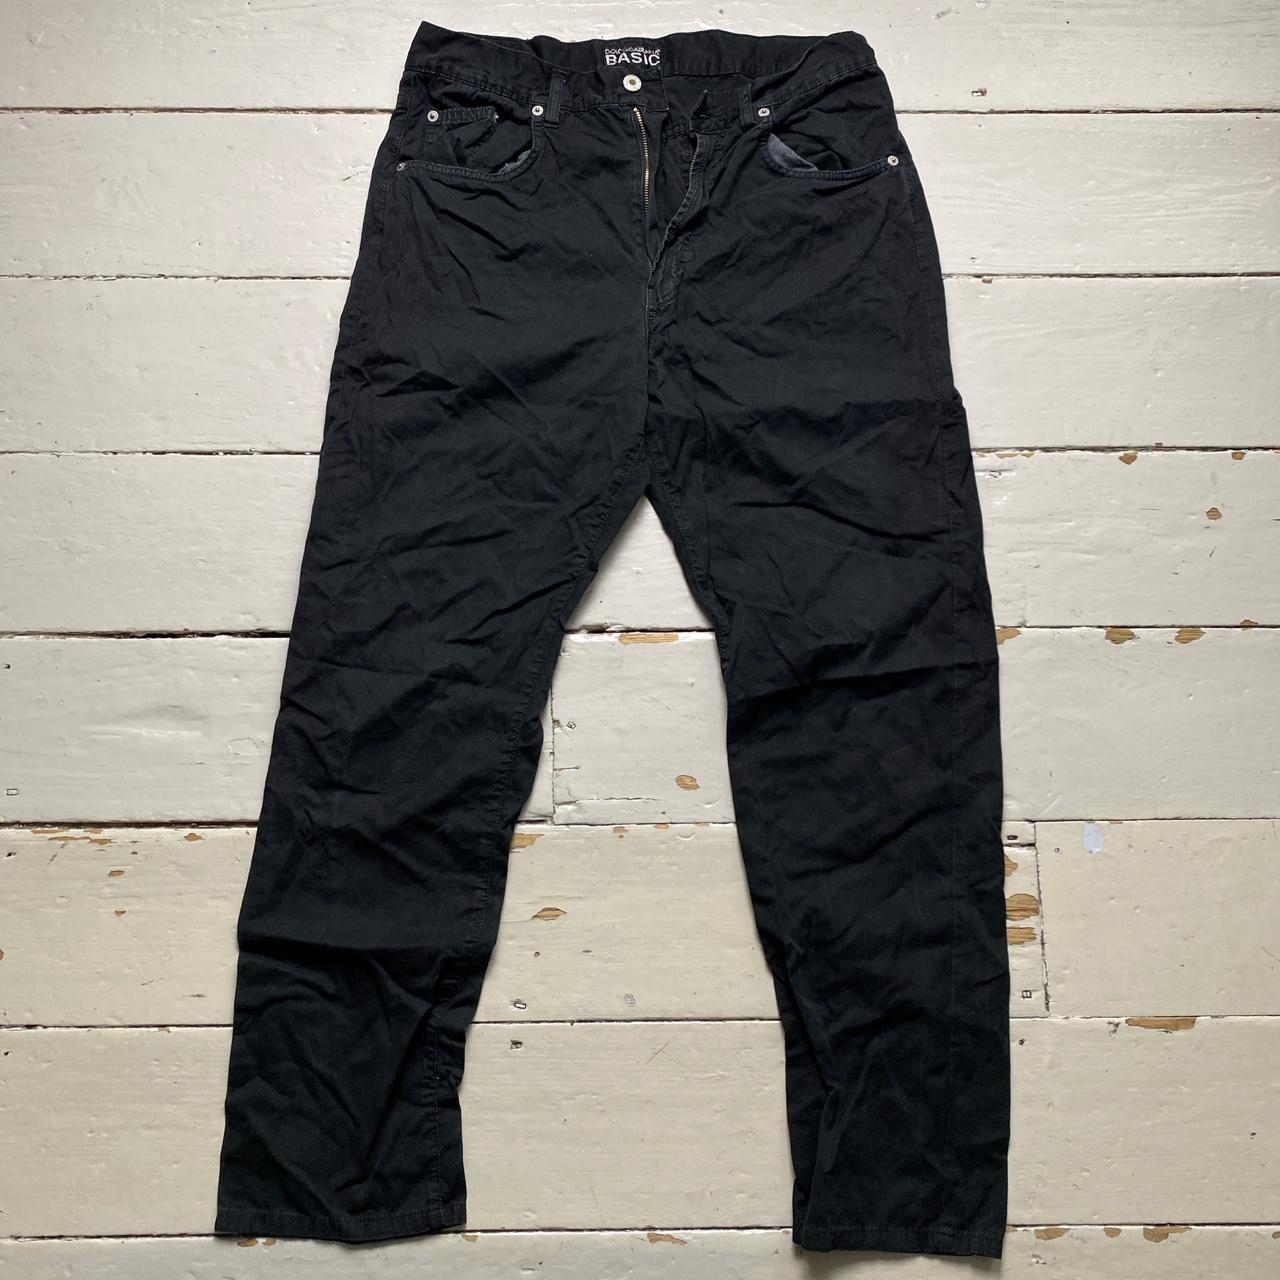 Dolce and Gabbana Vintage Basic Black Trousers Jeans